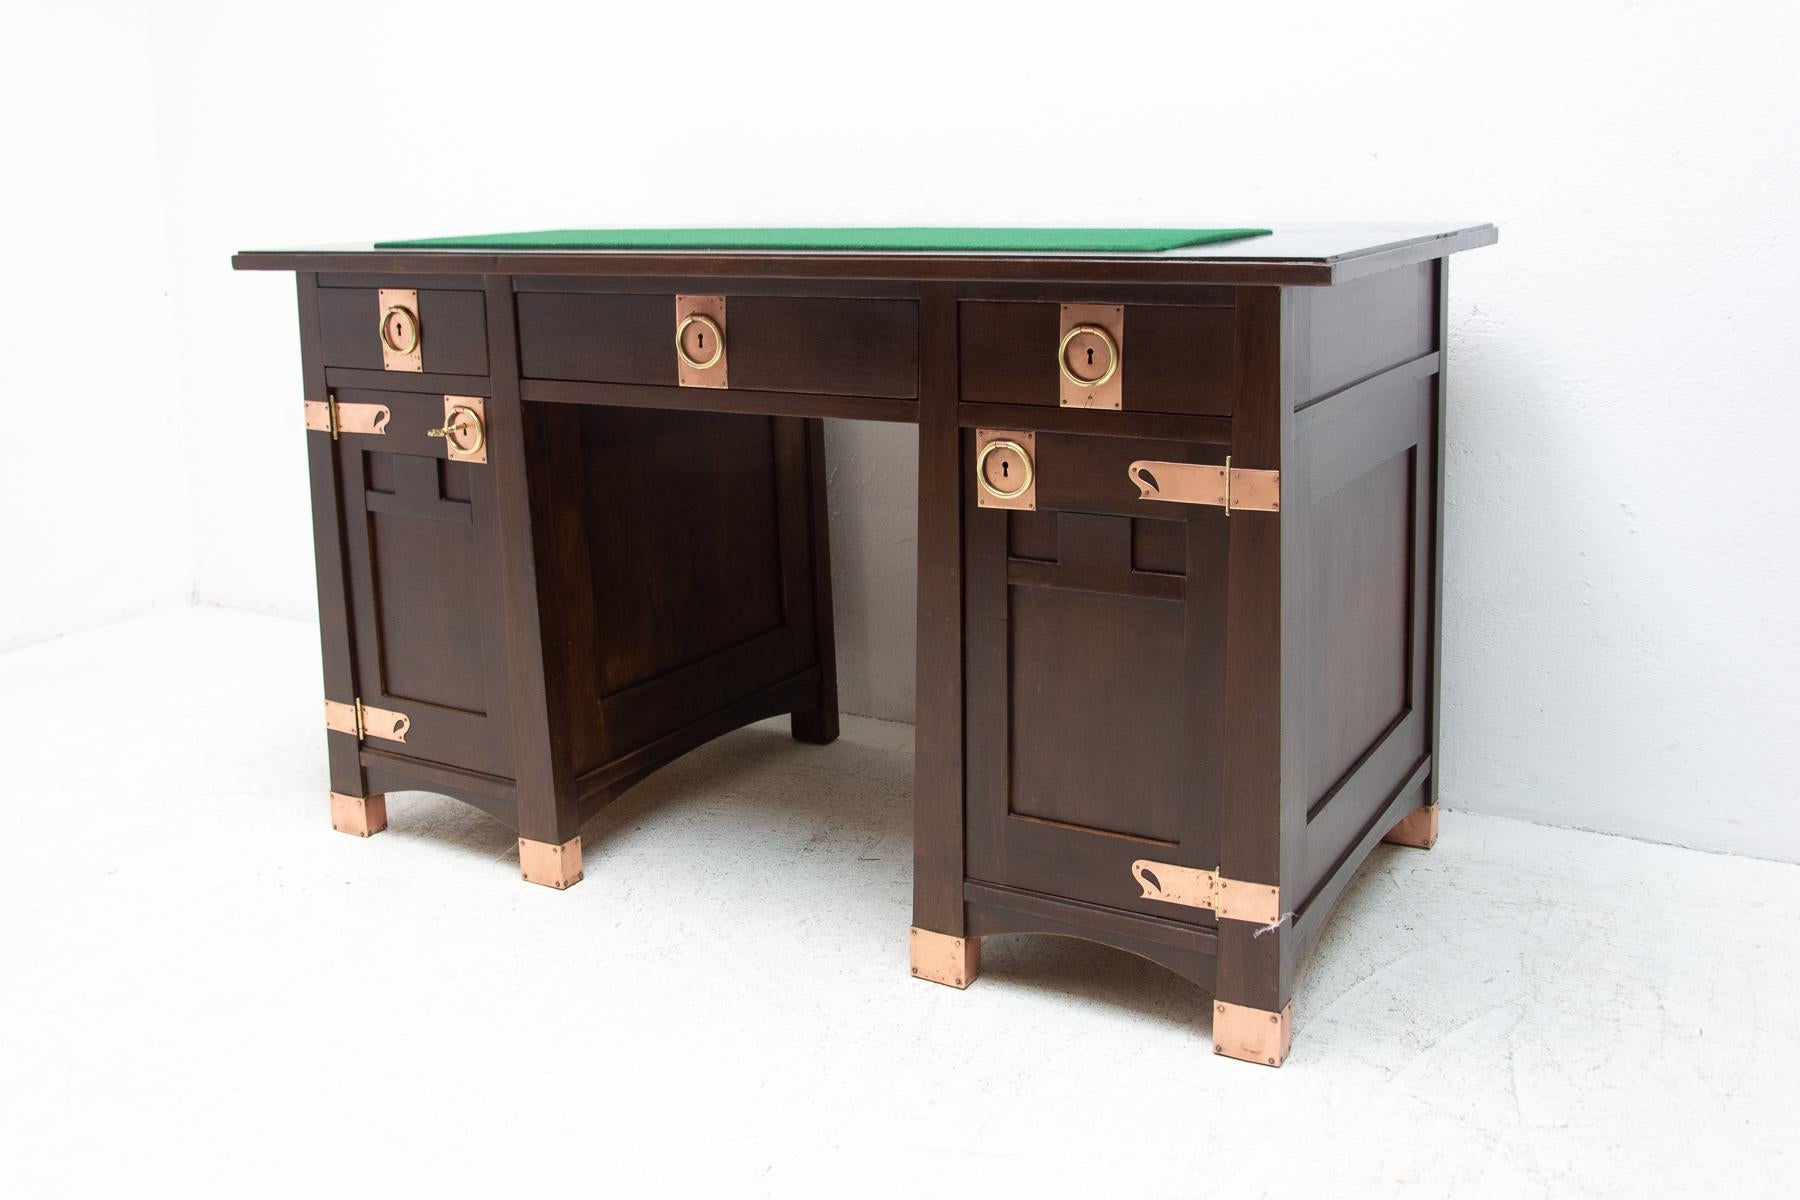 This luxurious-looking Art Nouveau writing desk was made in about 1910 in the former Austria-Hungary. It is made of oak wood. The table top is covered with green plush in the front. All original metal decorative parts were professionally cleaned,